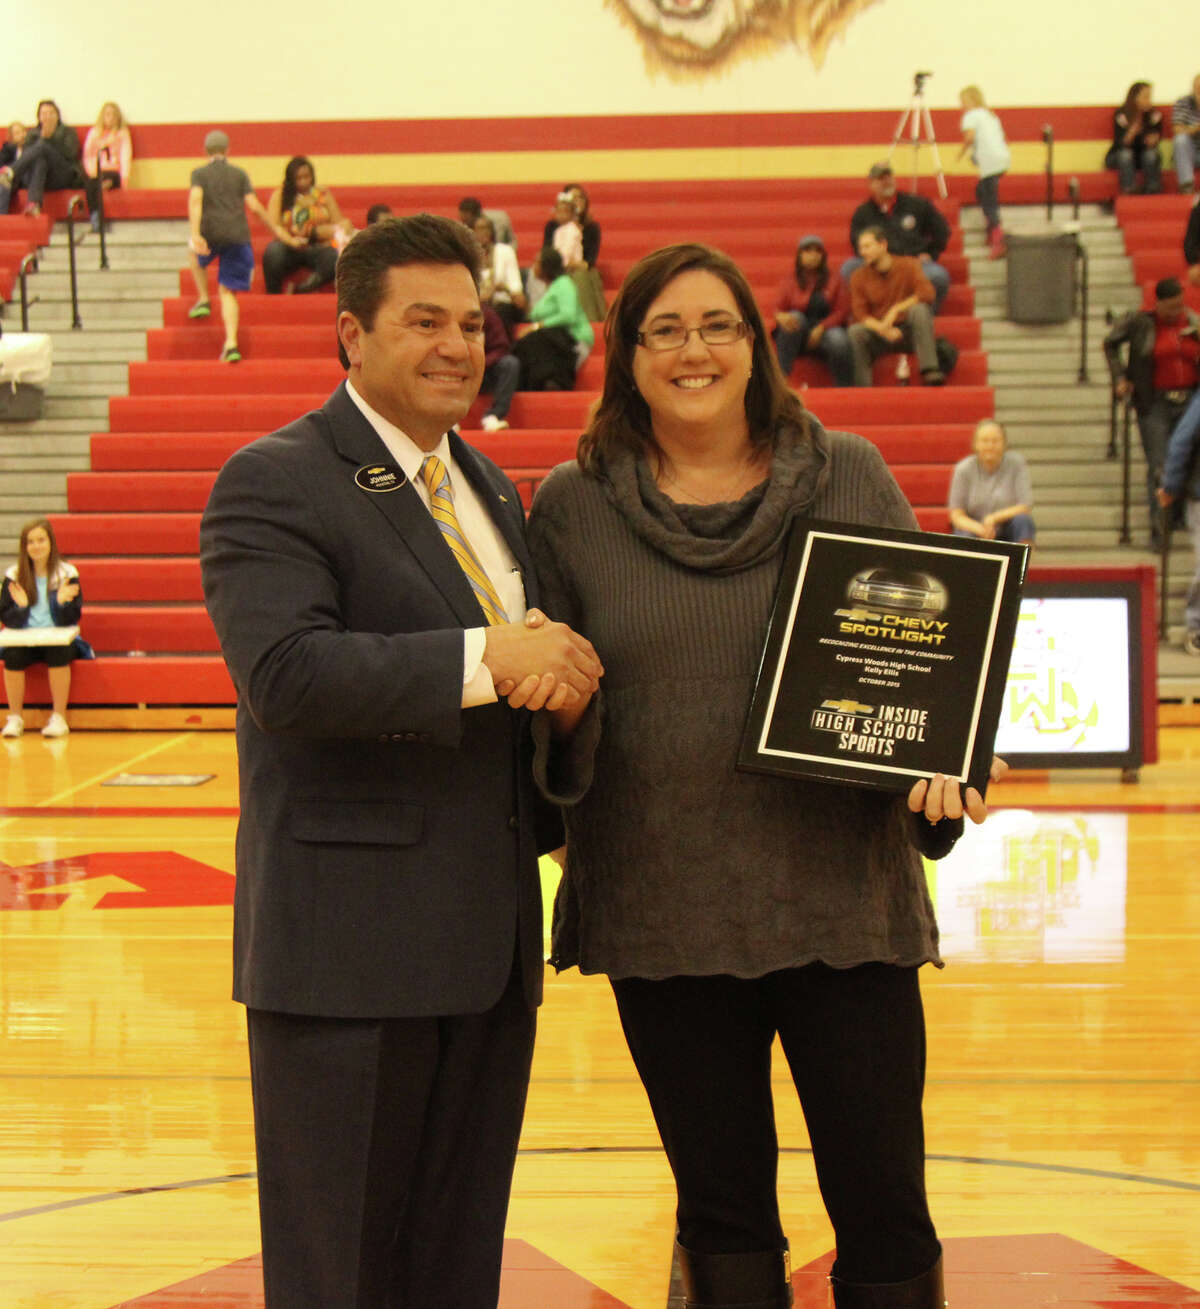 Johnnie Smith, general manager for Lone Star Chevrolet, presents the Chevrolet Spotlight Award to Cypress Woods High School director of instruction Kelly Ellis Feb. 5 at the Lady Wildcats' basketball game.